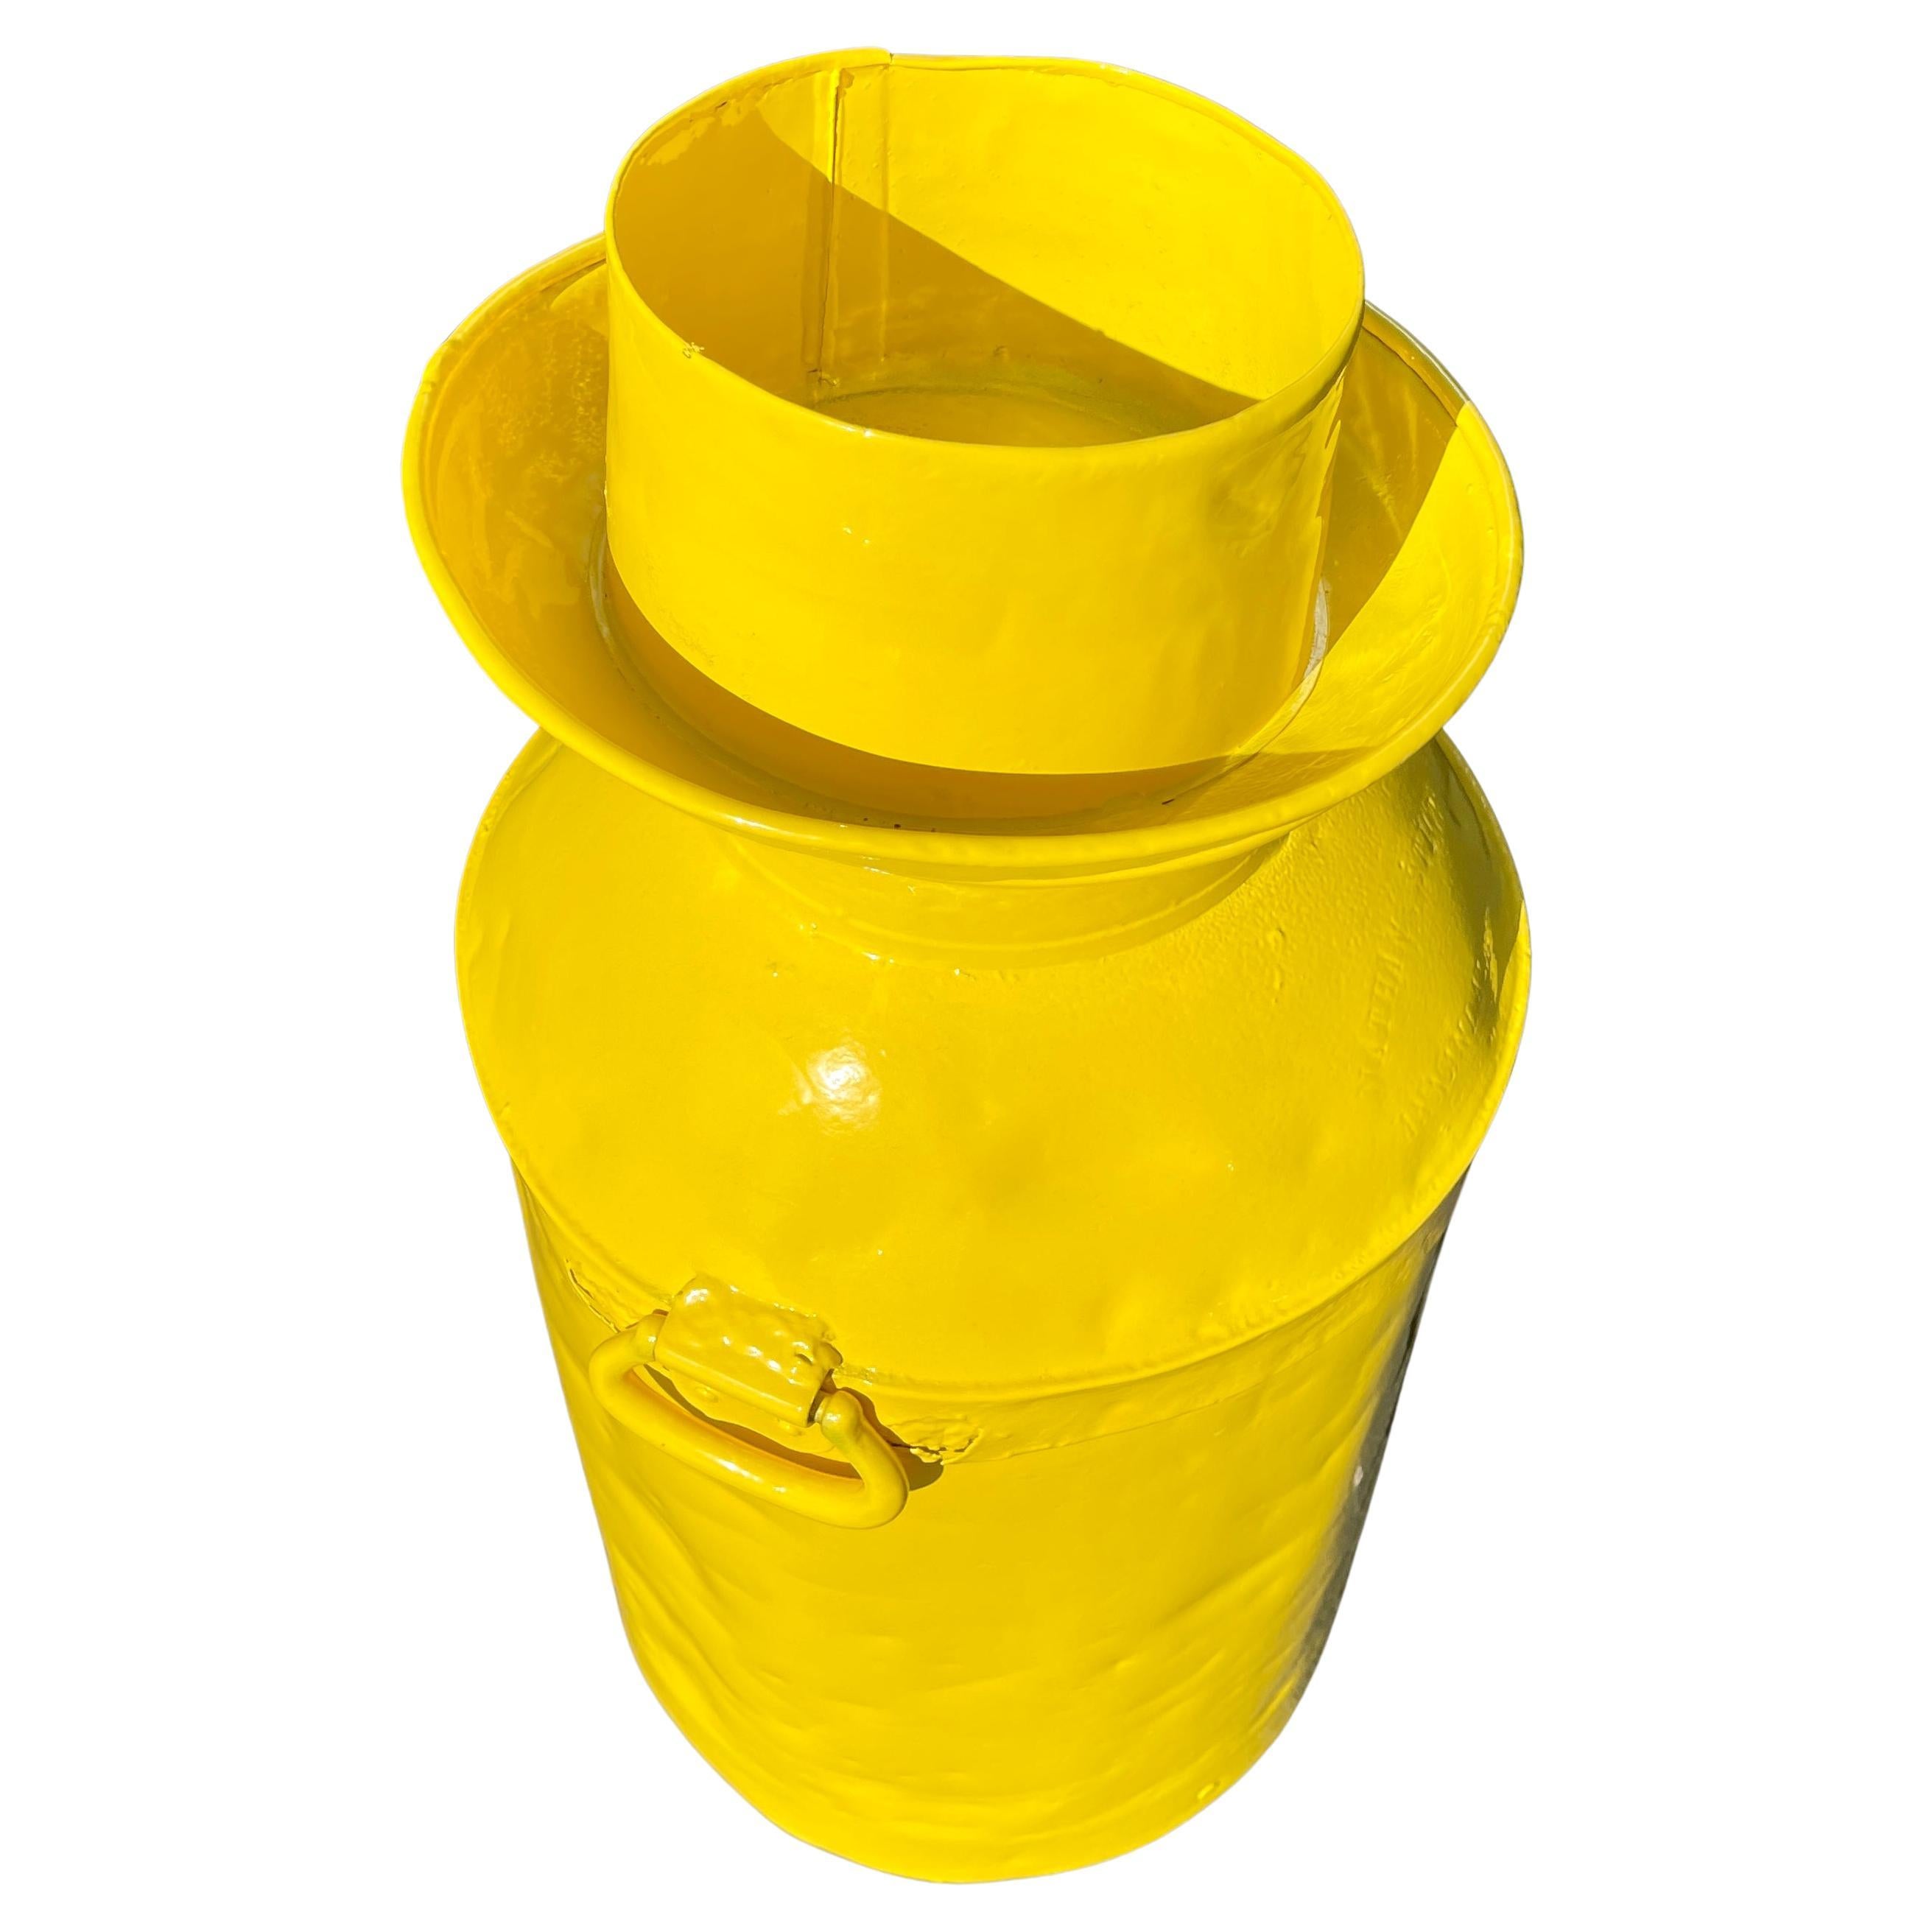 Powder-Coated Vintage Metal Milk Jug Side Table, Powder Coated Yellow, Bright Sunshine For Sale